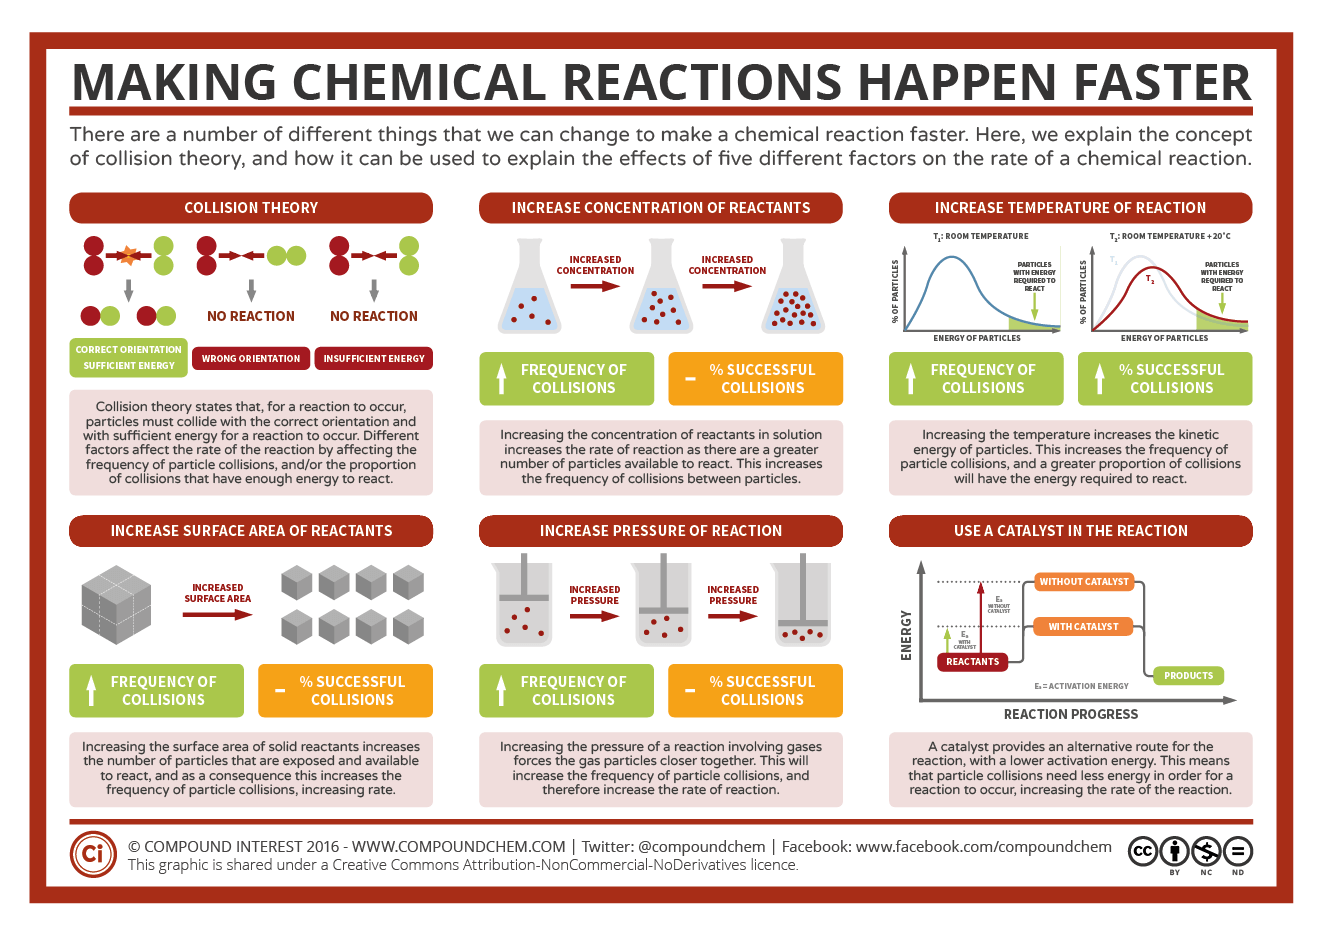 How To Create An Infographic On Chemical Reactions